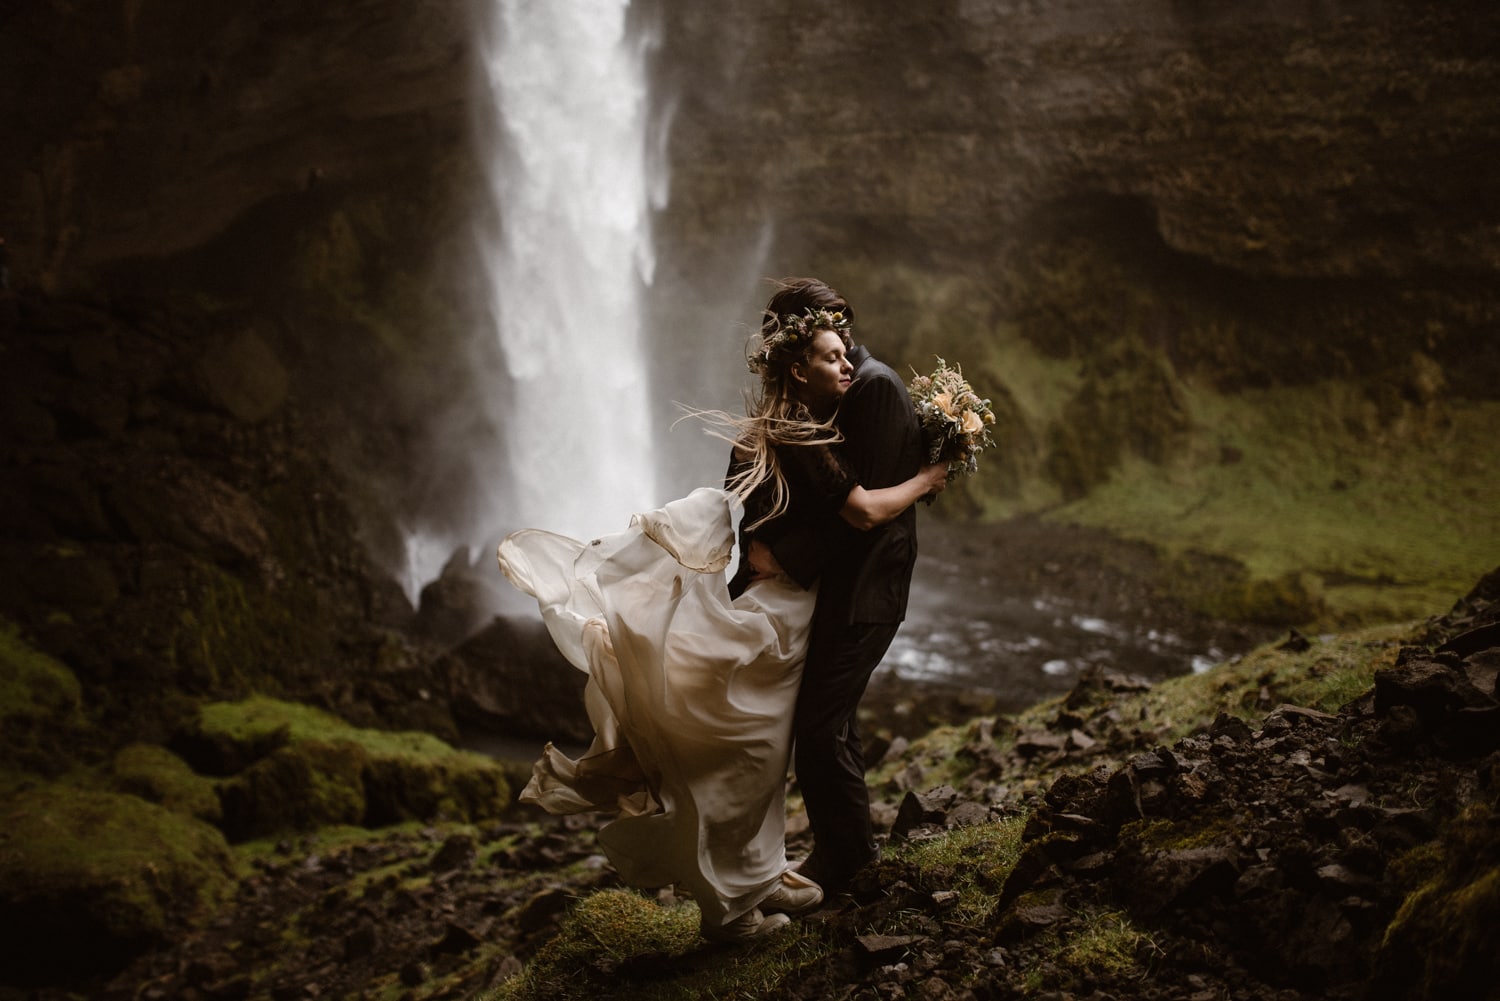 Bride and groom embracing in front of a waterfall in Iceland. The bride's white dress is flowing in the wind behind her. 